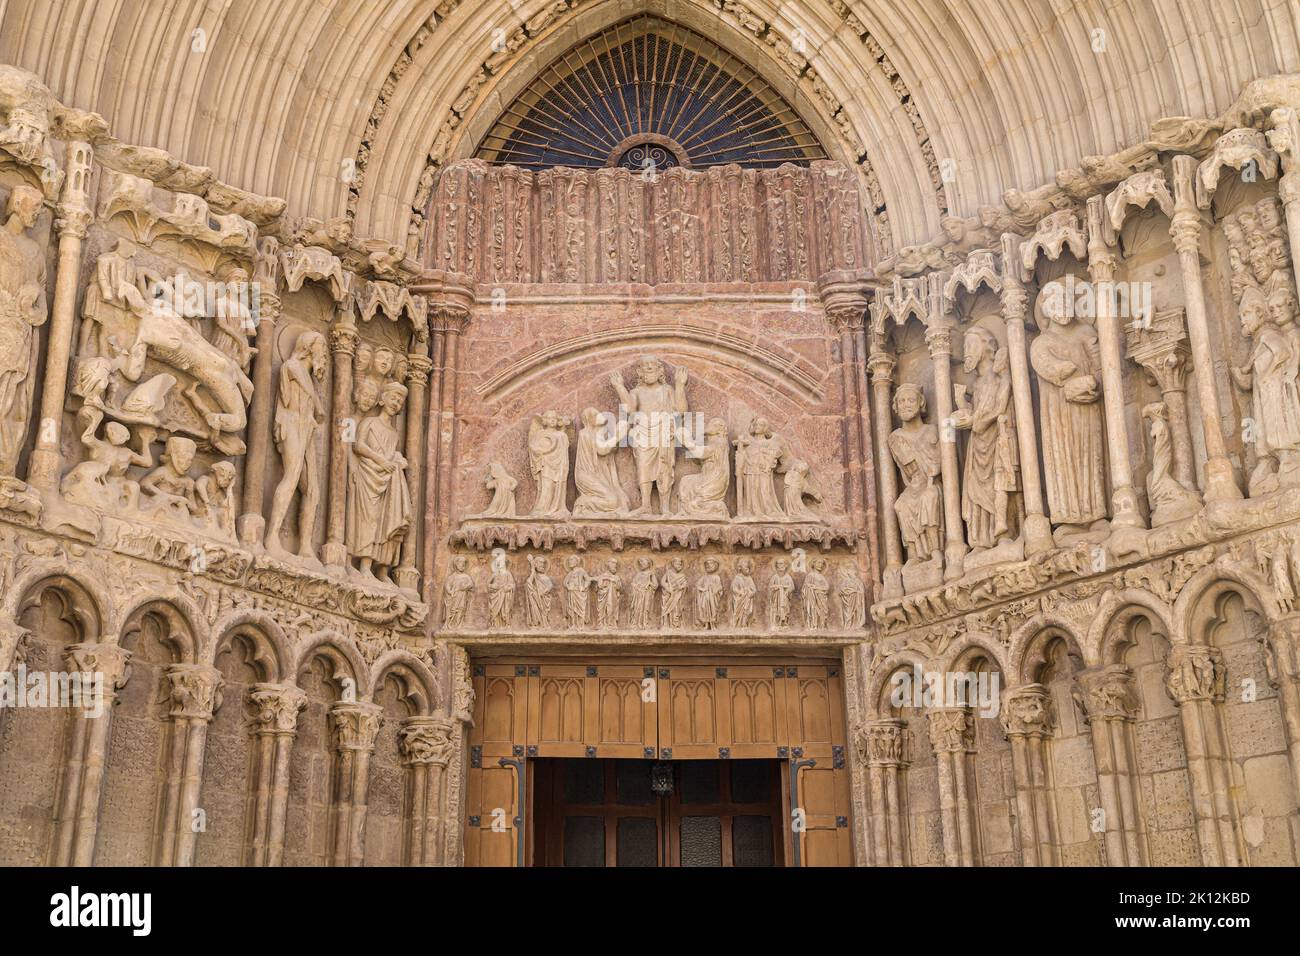 Detail of the Portal of San Bartolome Church in Logrono, Spain. Stock Photo